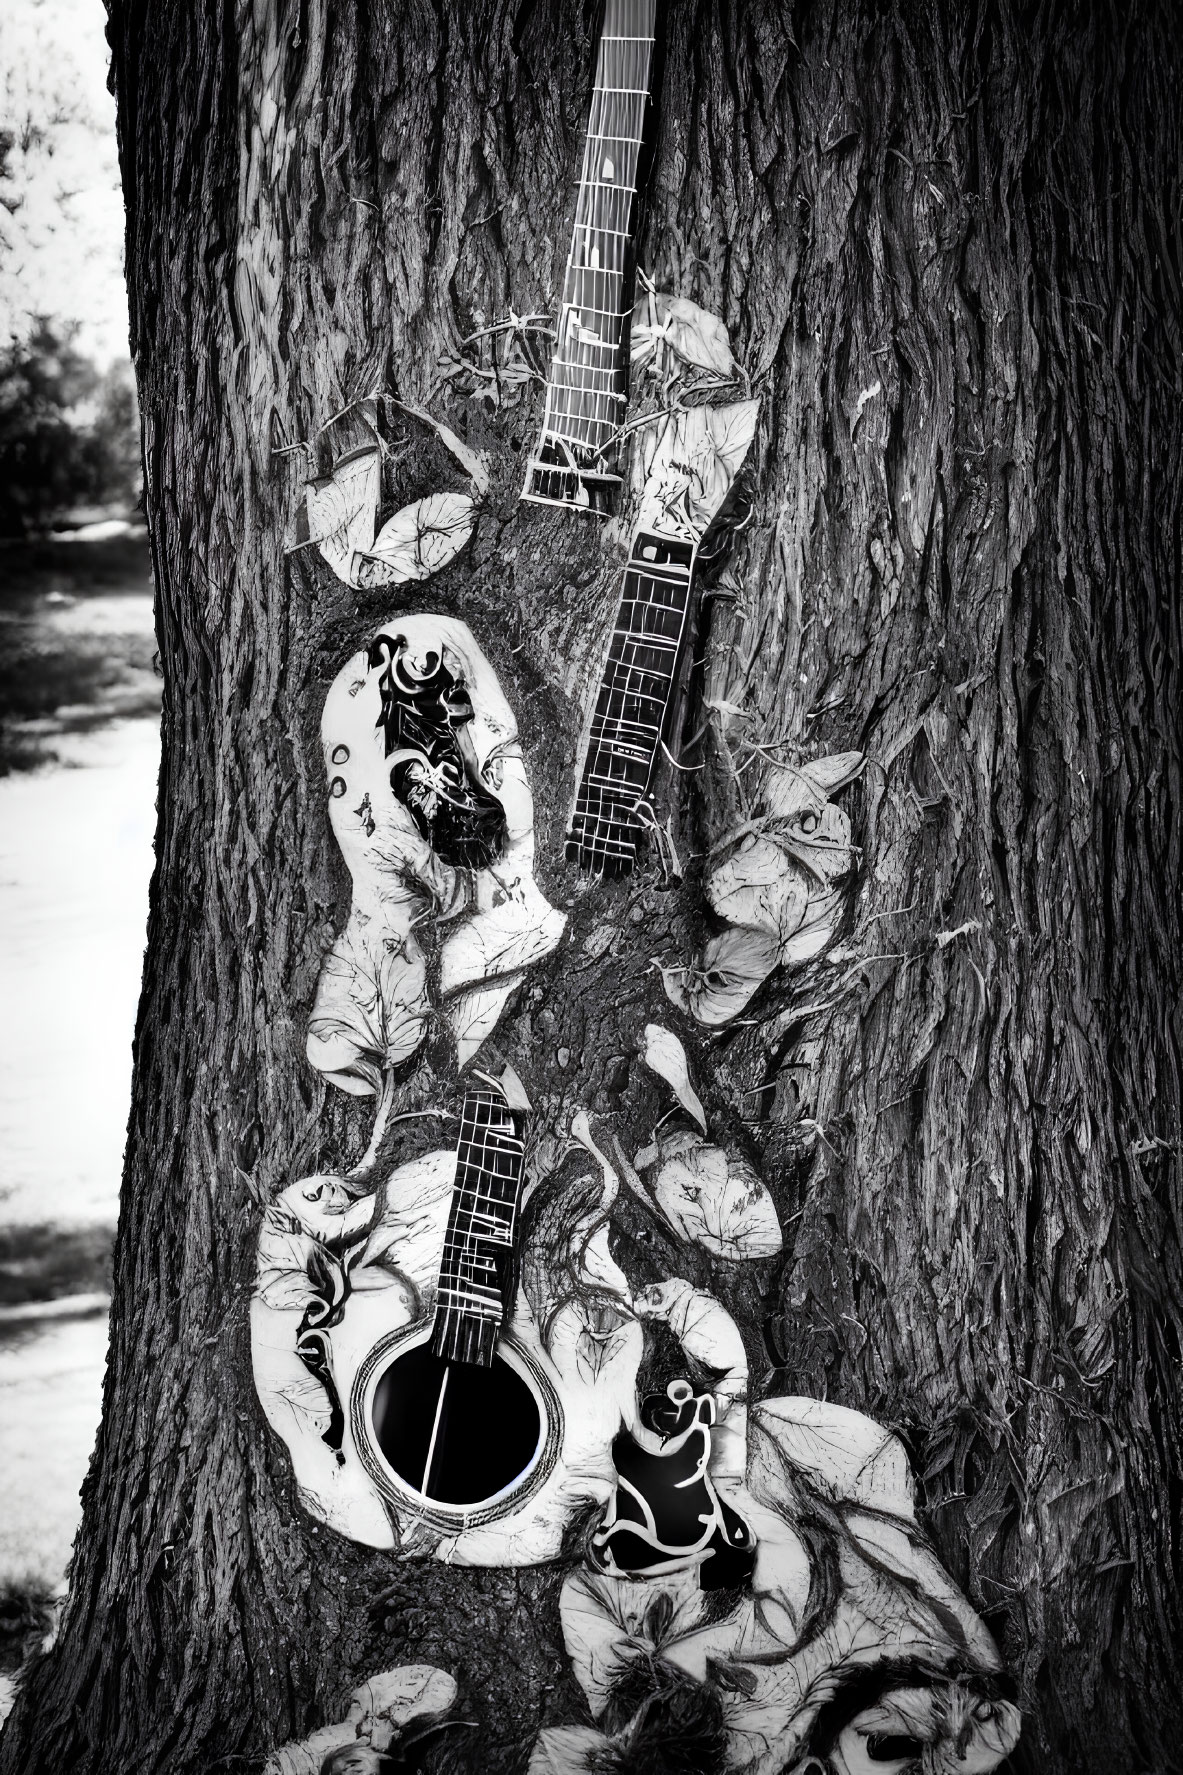 Ornate Decorated Guitar Leaning Against Tree with Intricate Designs and Vines